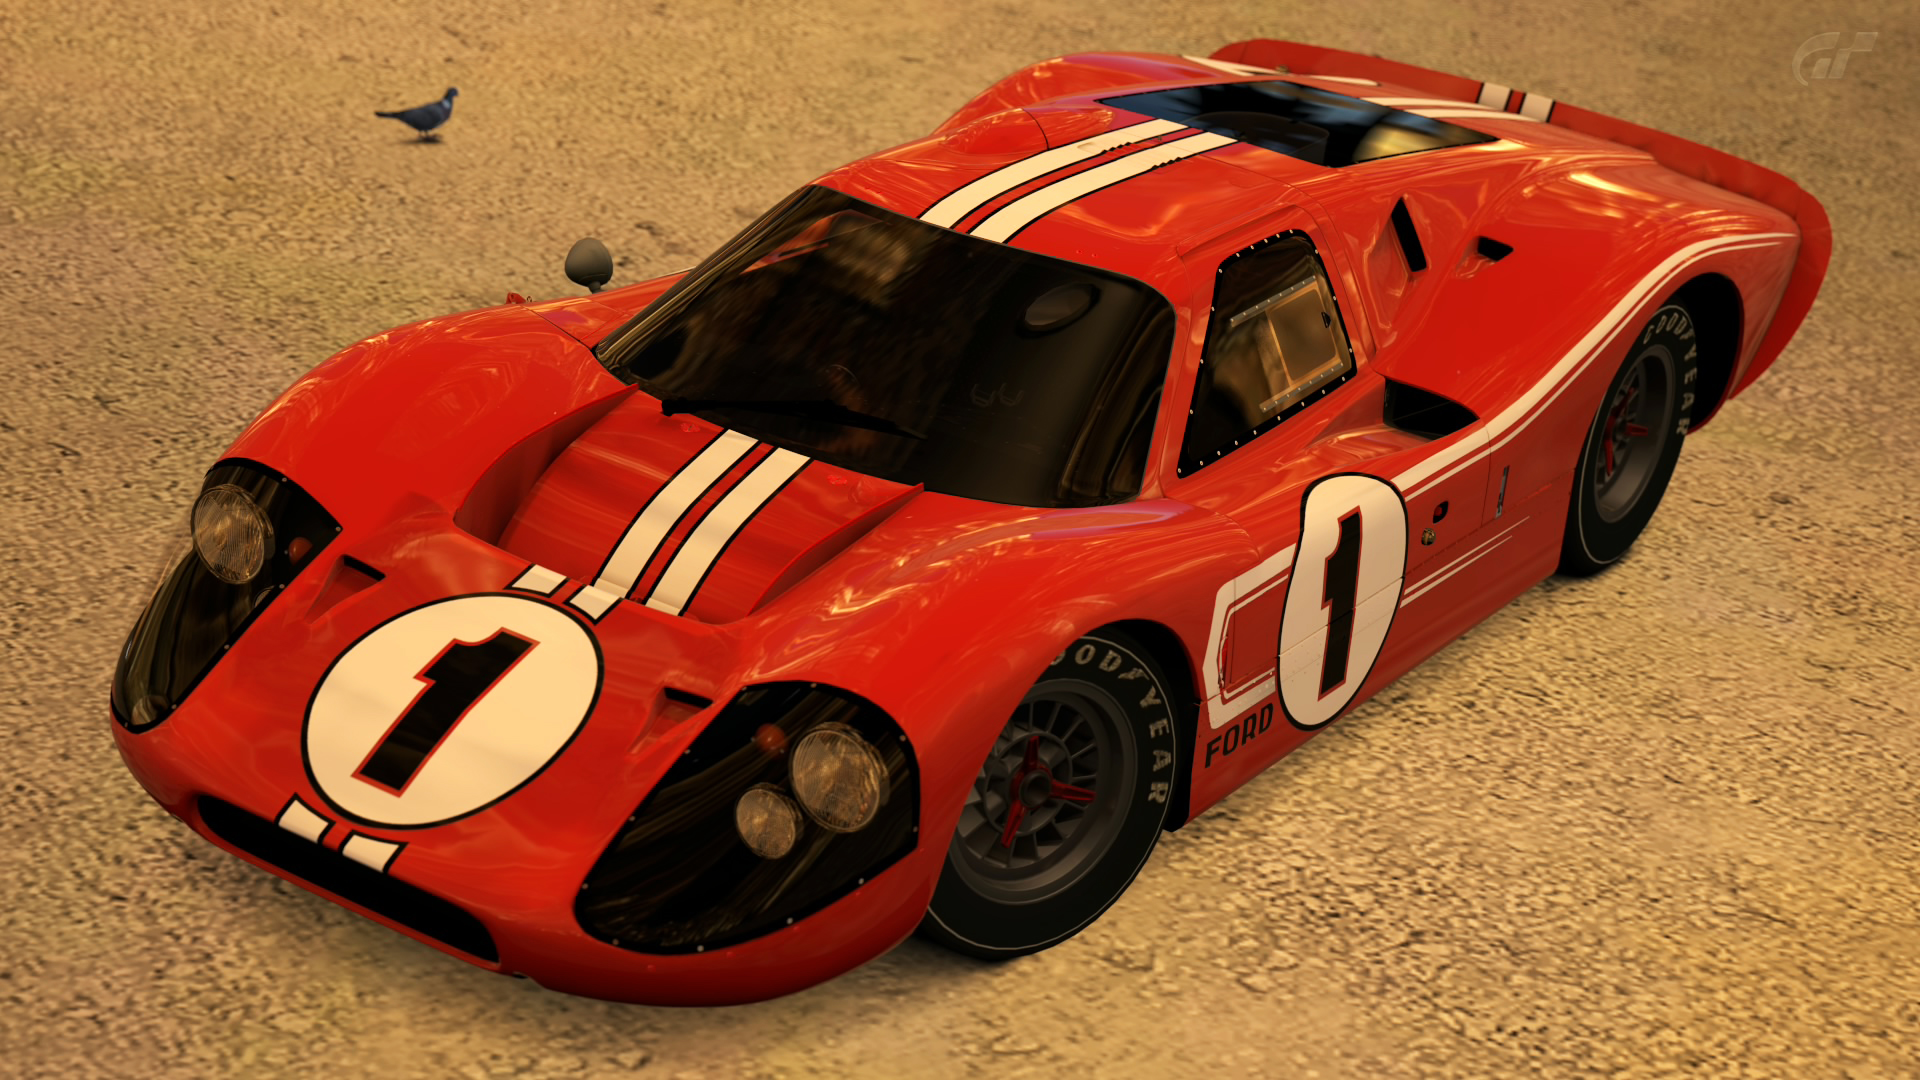 What are you guys opinion on the Ford gt40 mk4 '67?? : r/granturismo